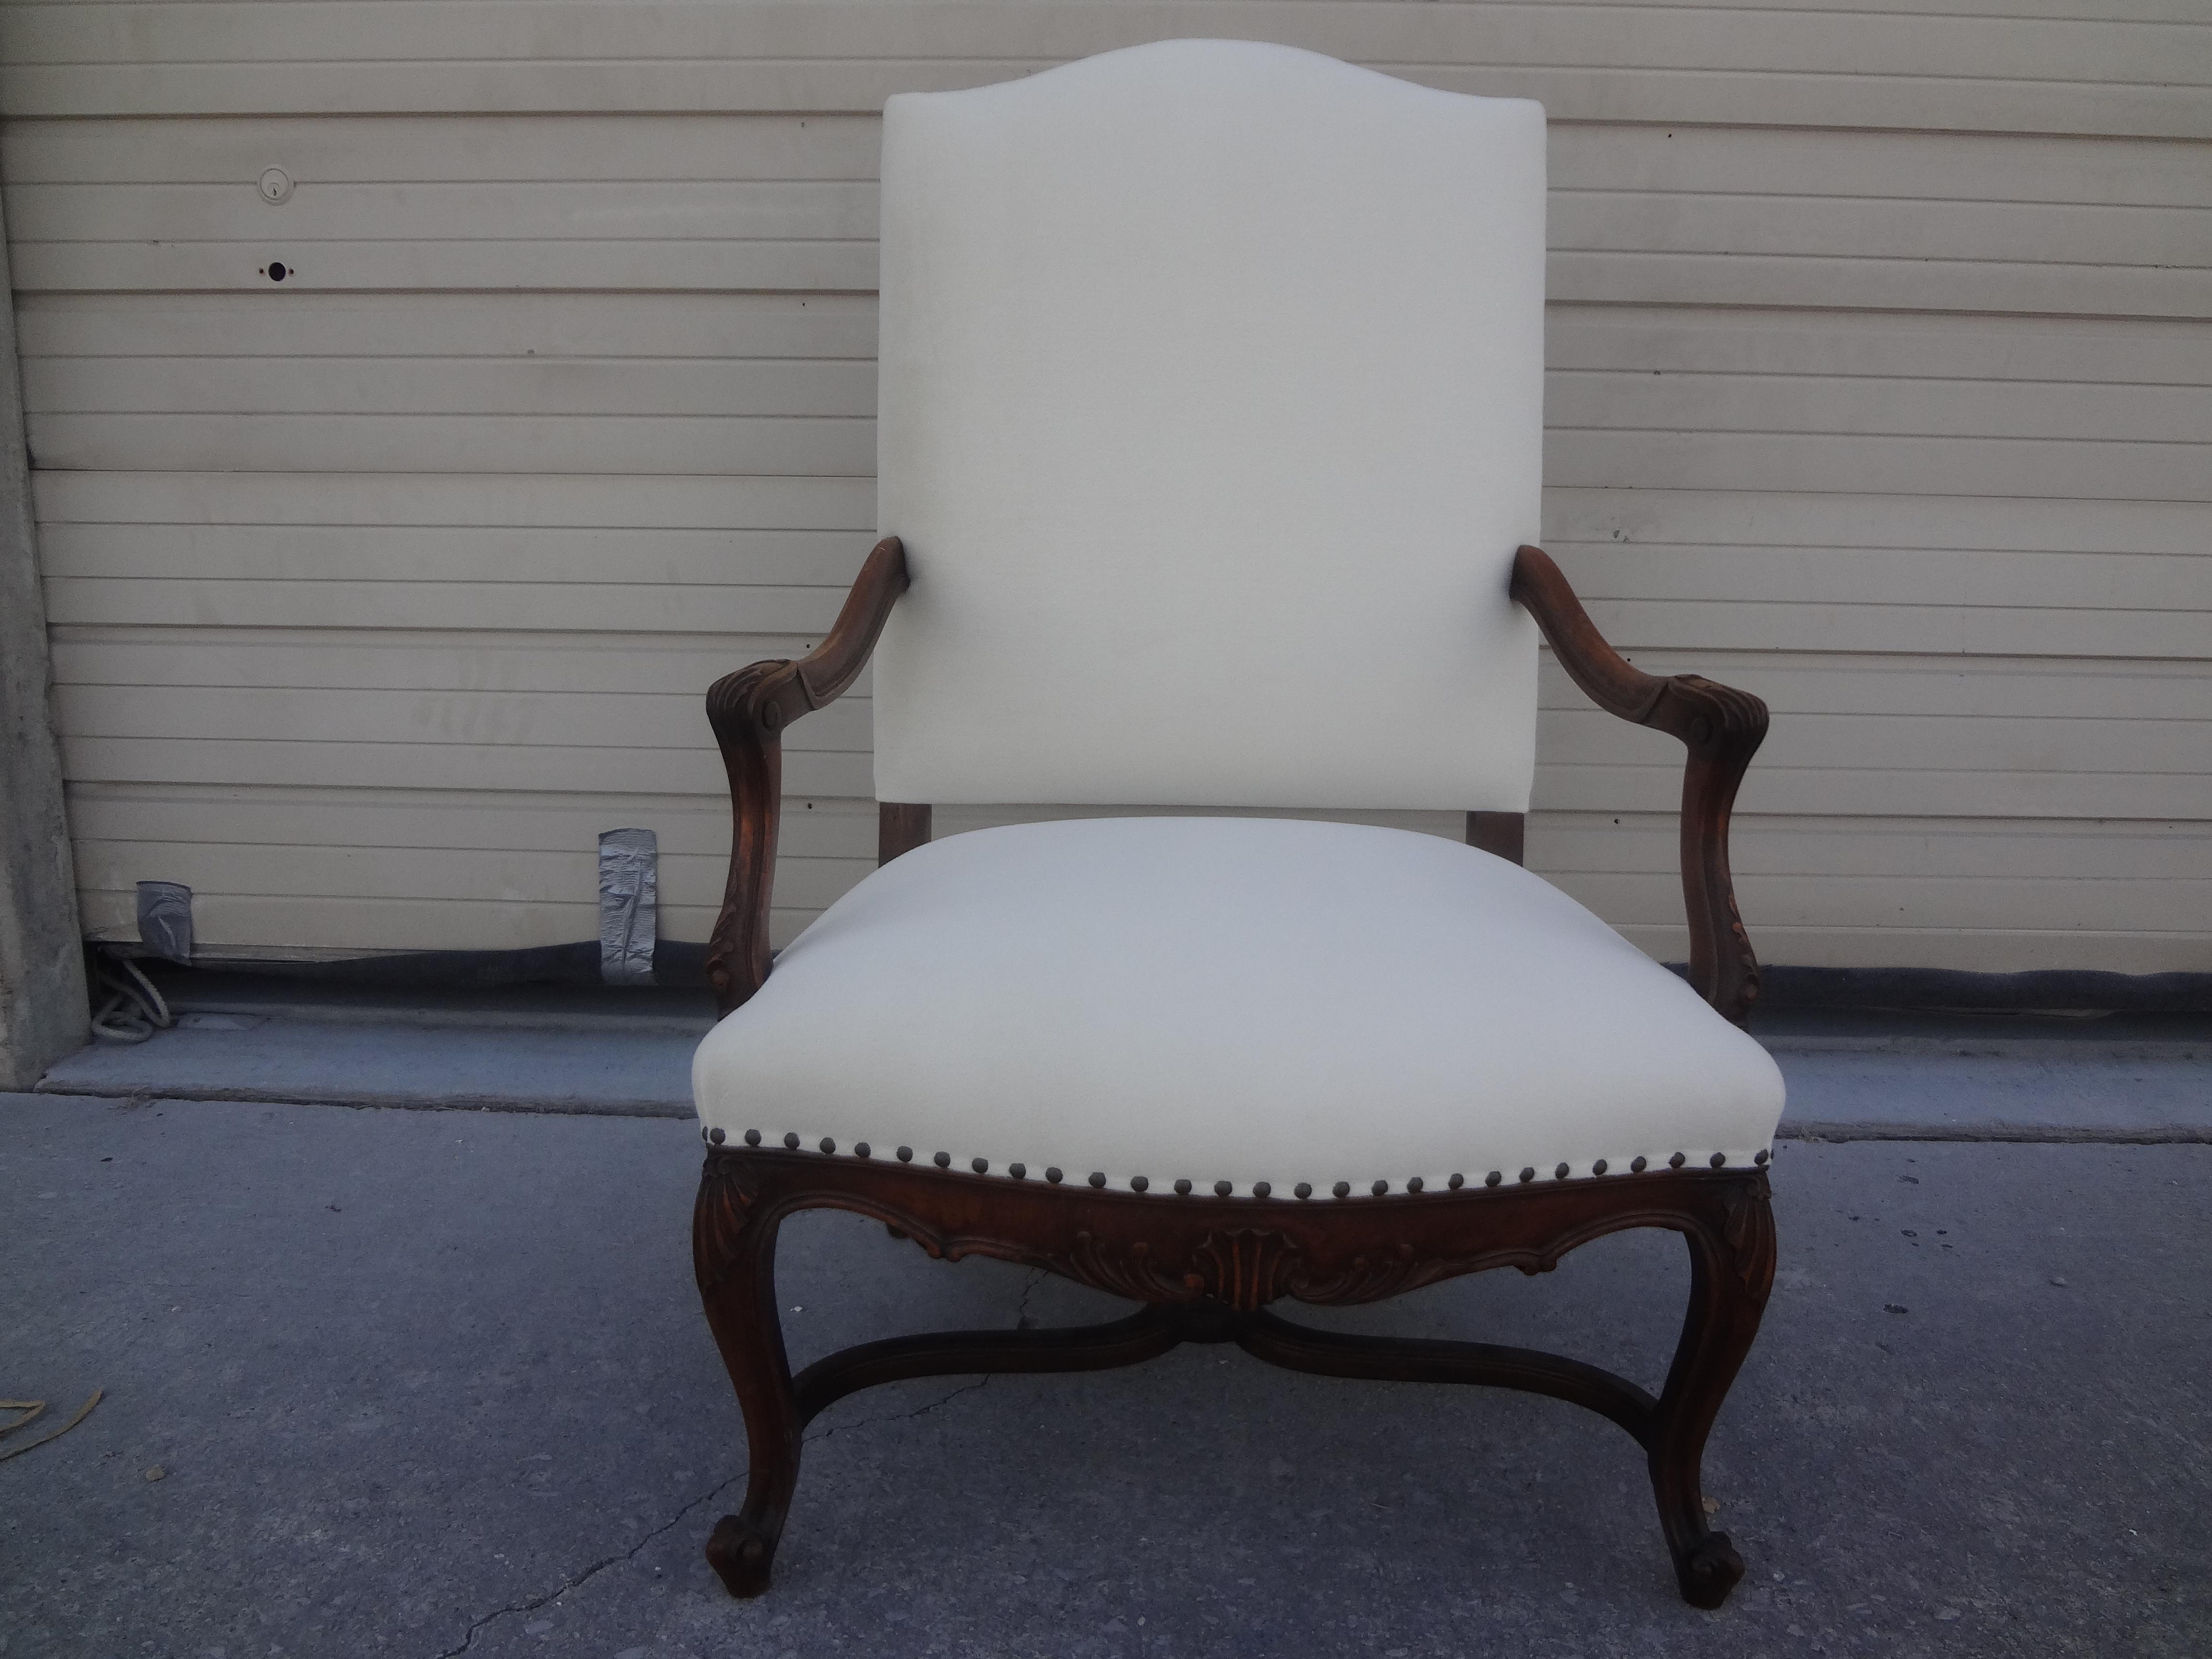 19th century French Regence style walnut chair. This stunning 19th century French Régence style walnut fauteuil, armchair or side chair has a lovely Entretoise or cross stretcher between the four legs. This antique French chair has been